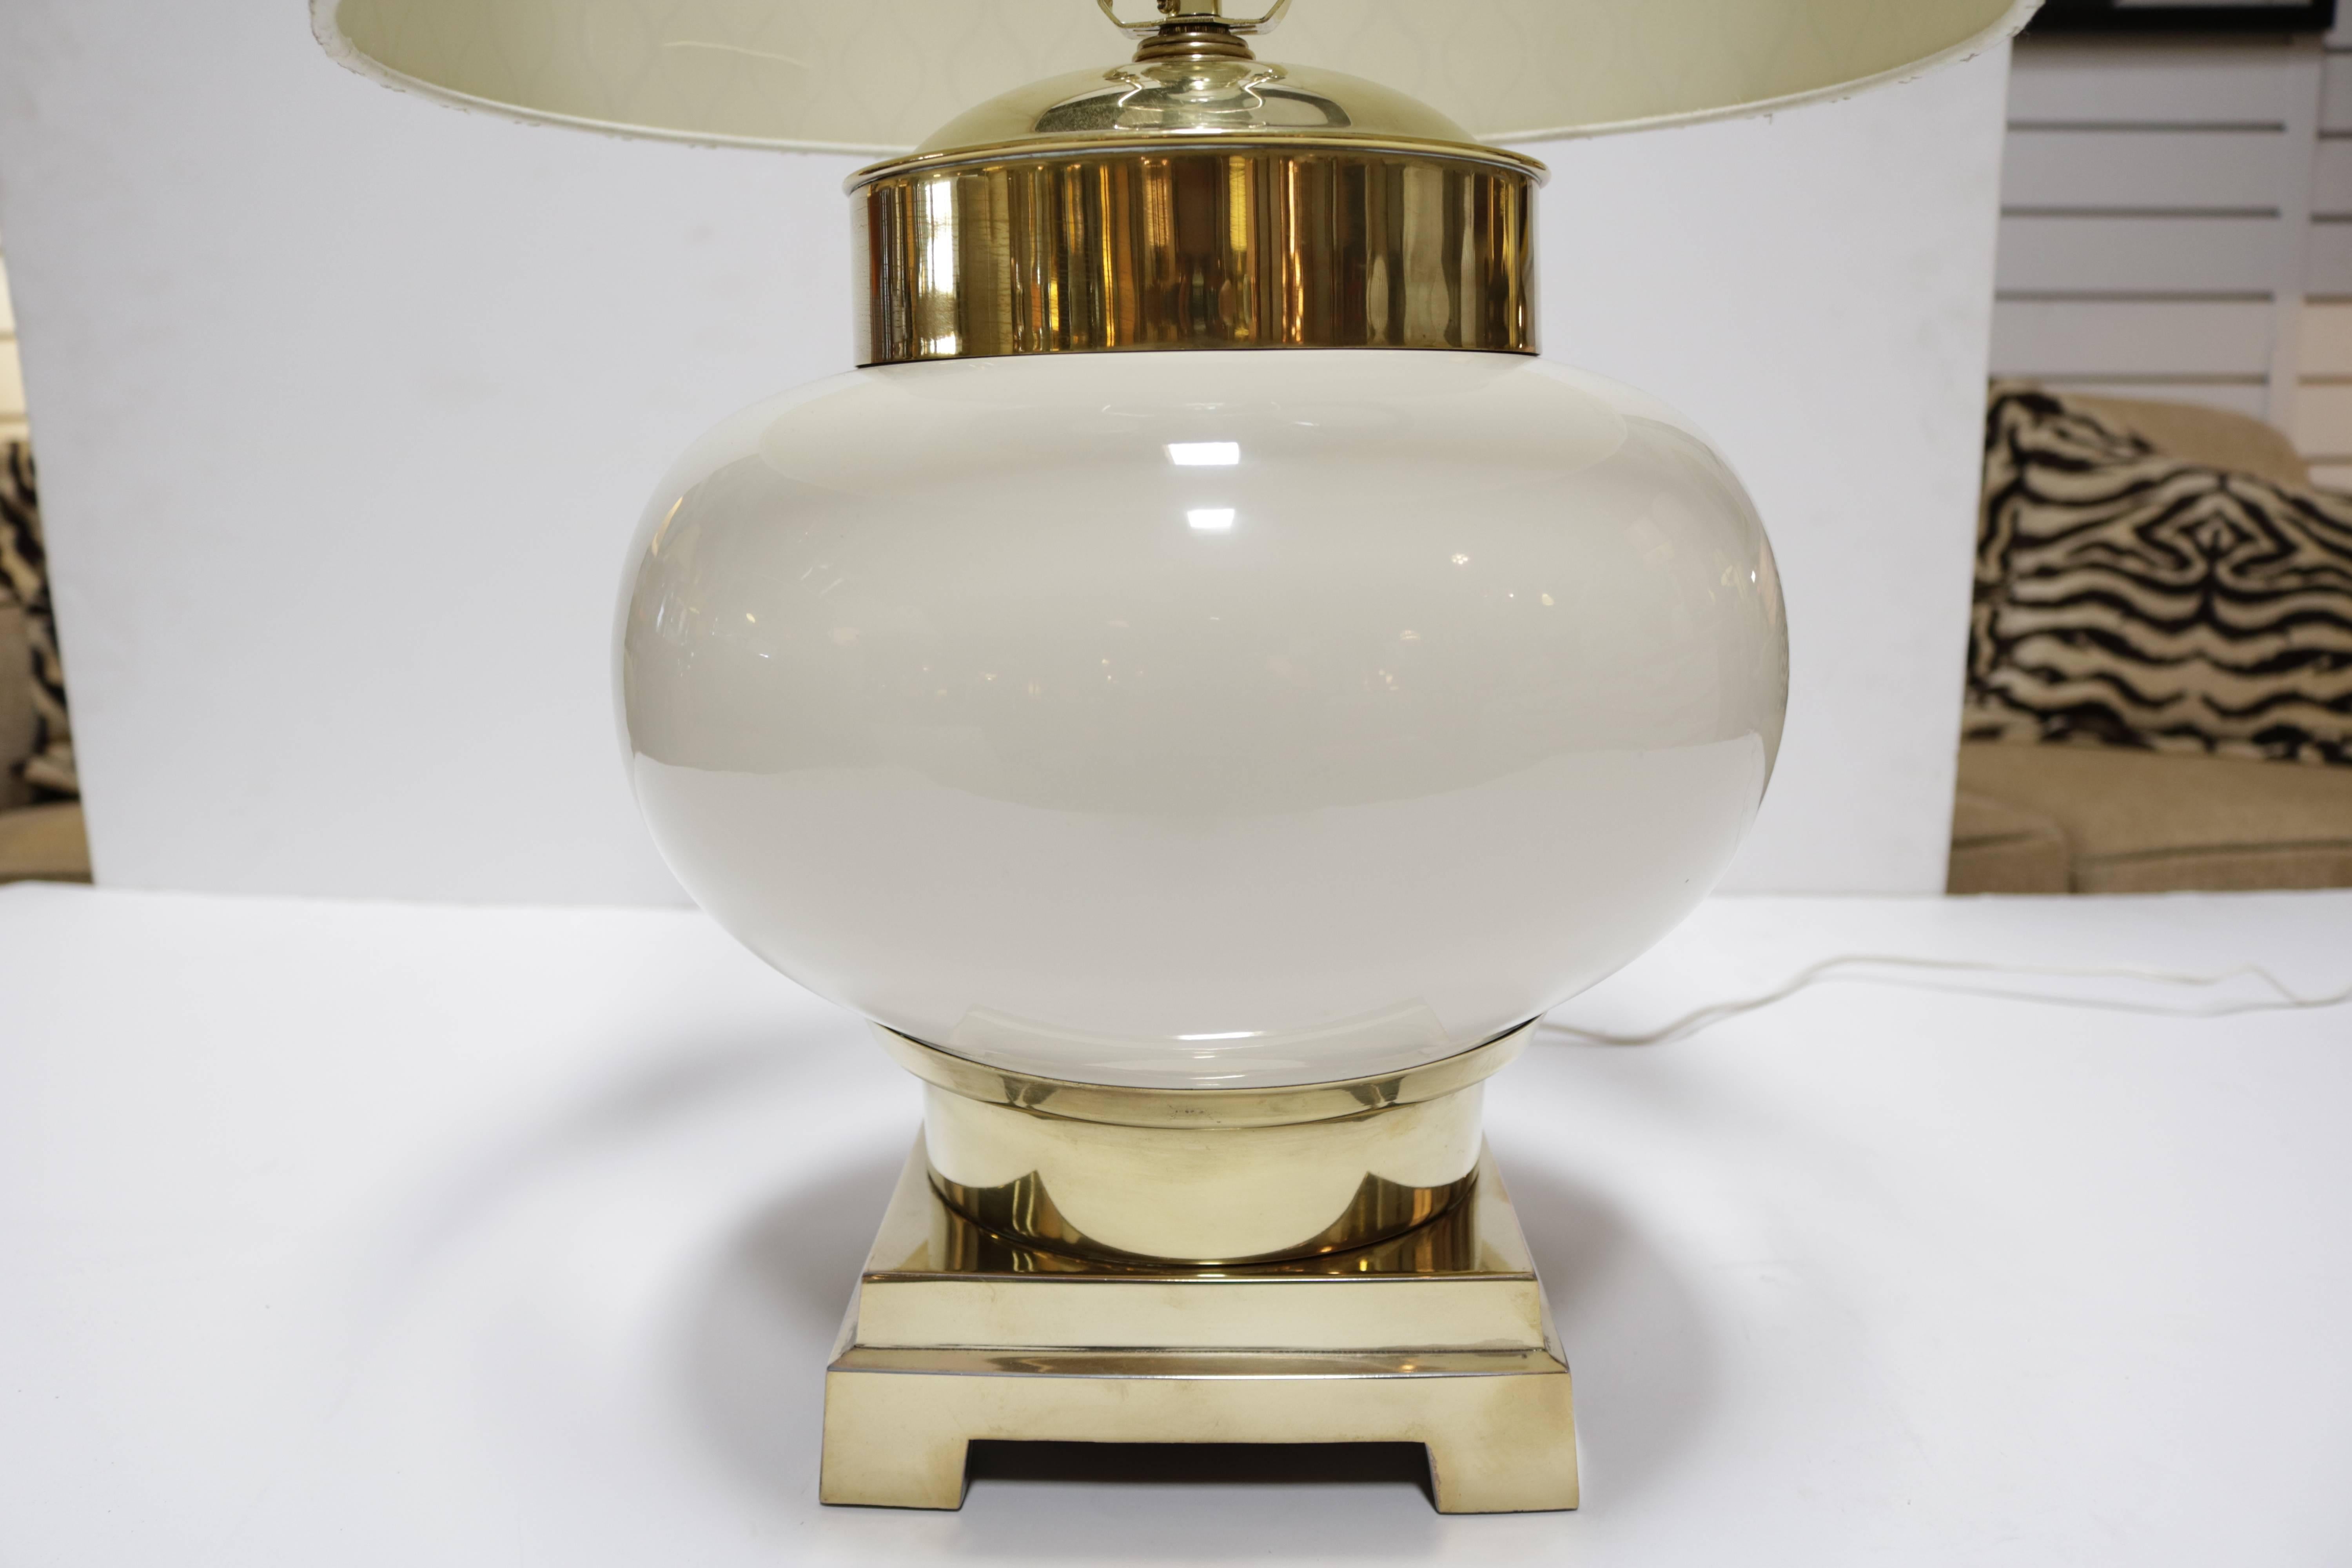 These lamps feature a brass top and base with an ivory ceramic body.